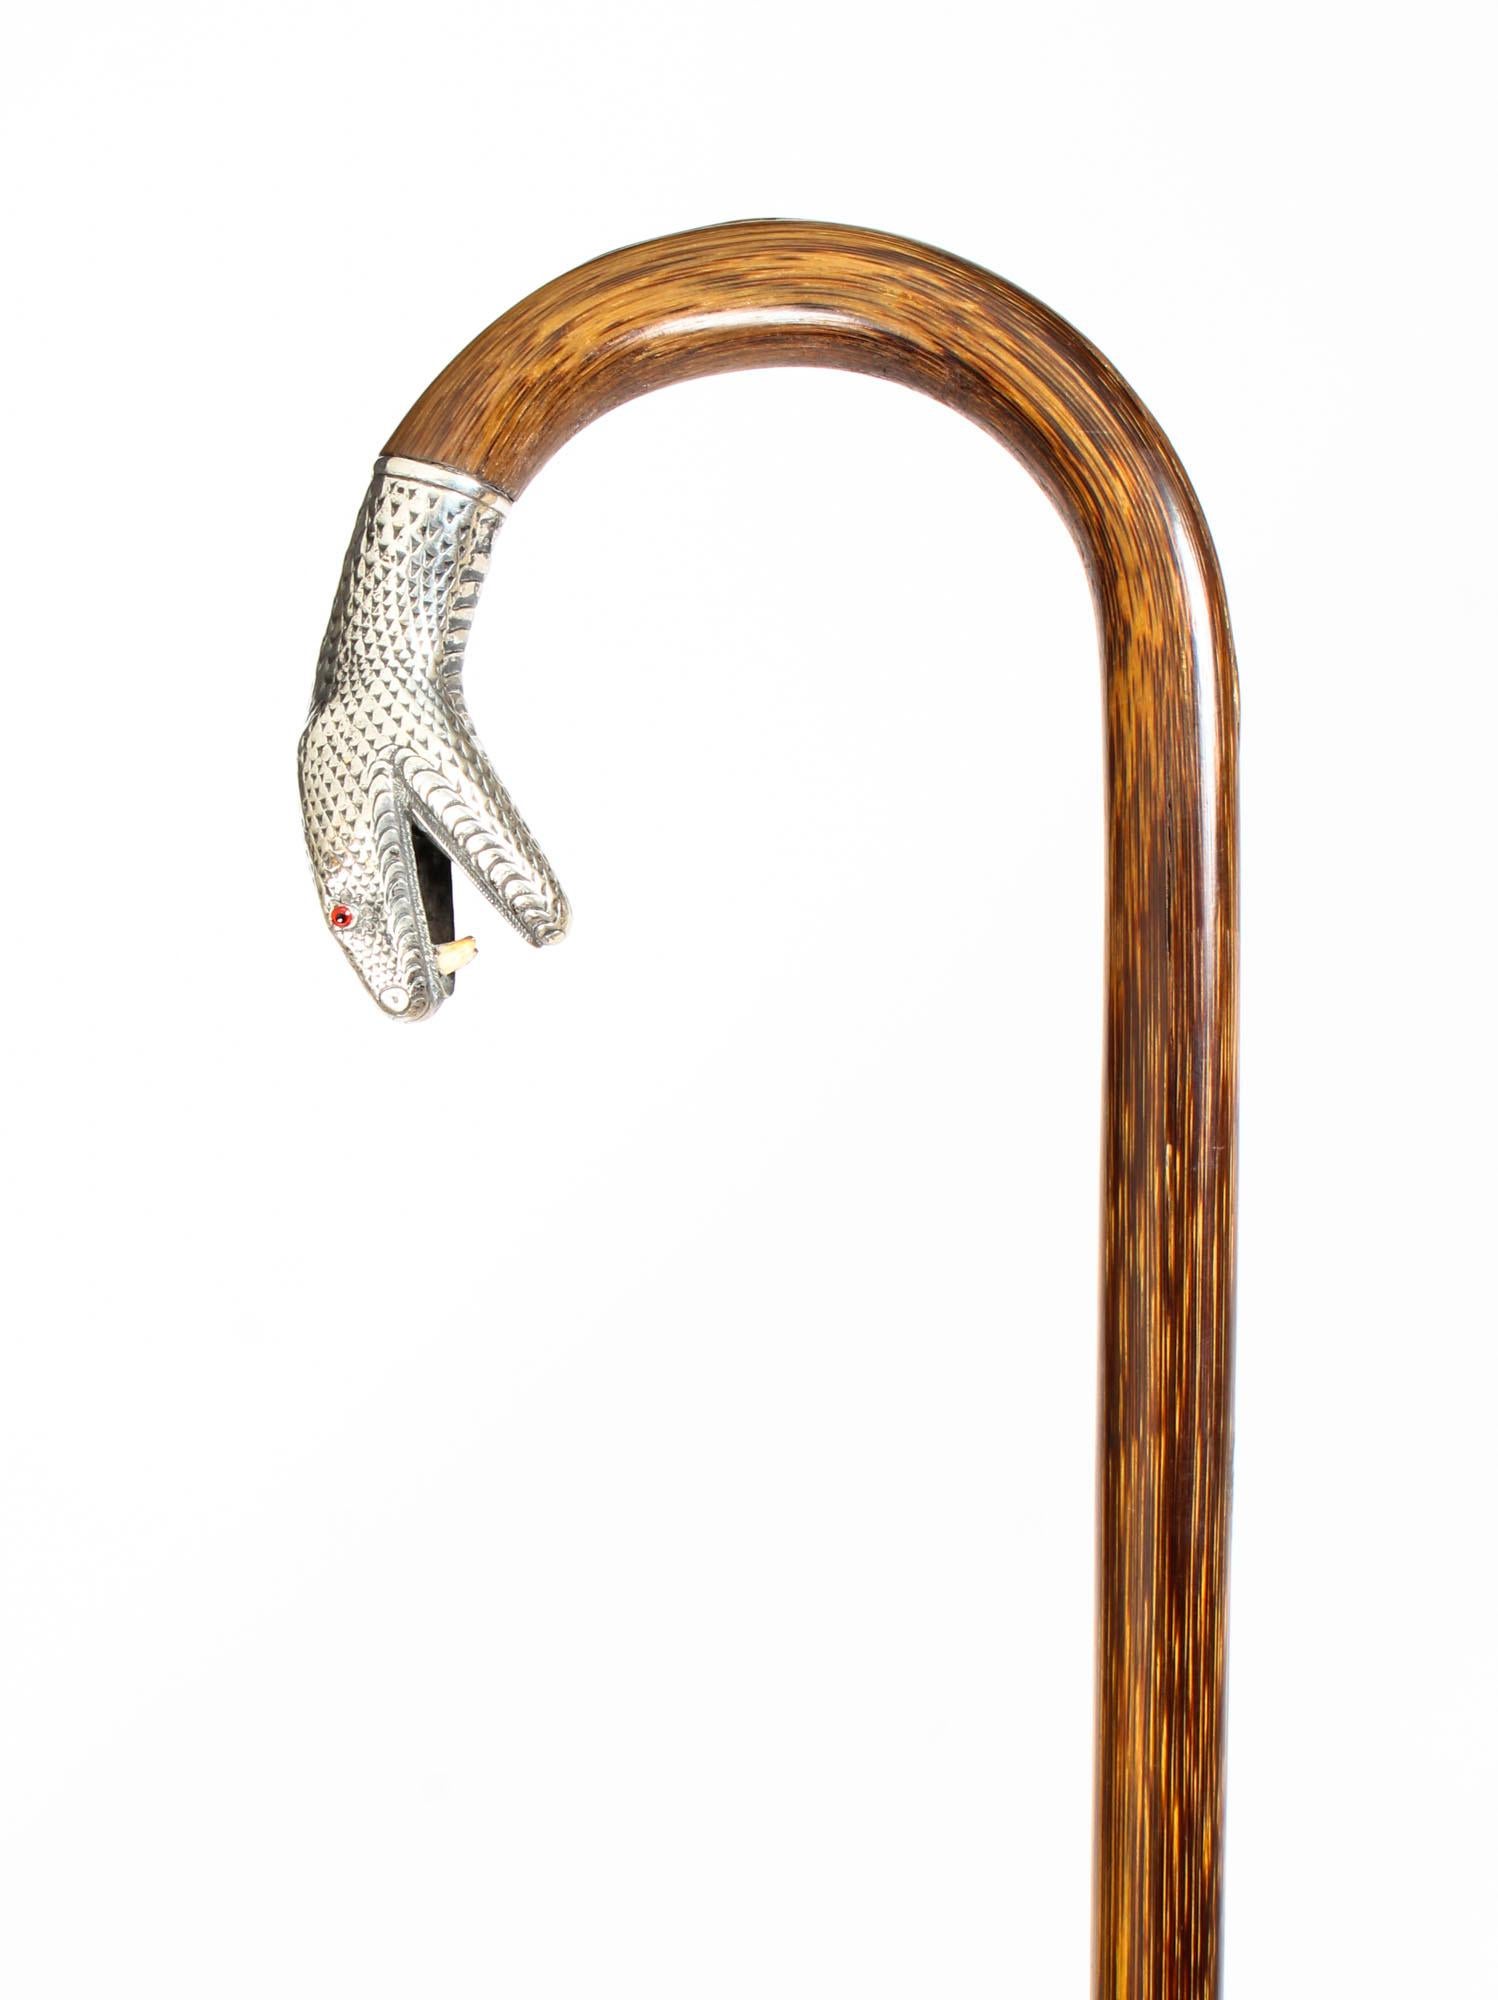 Antique Walking Stick Cane with Silver Snake's Head, 19th Century 2